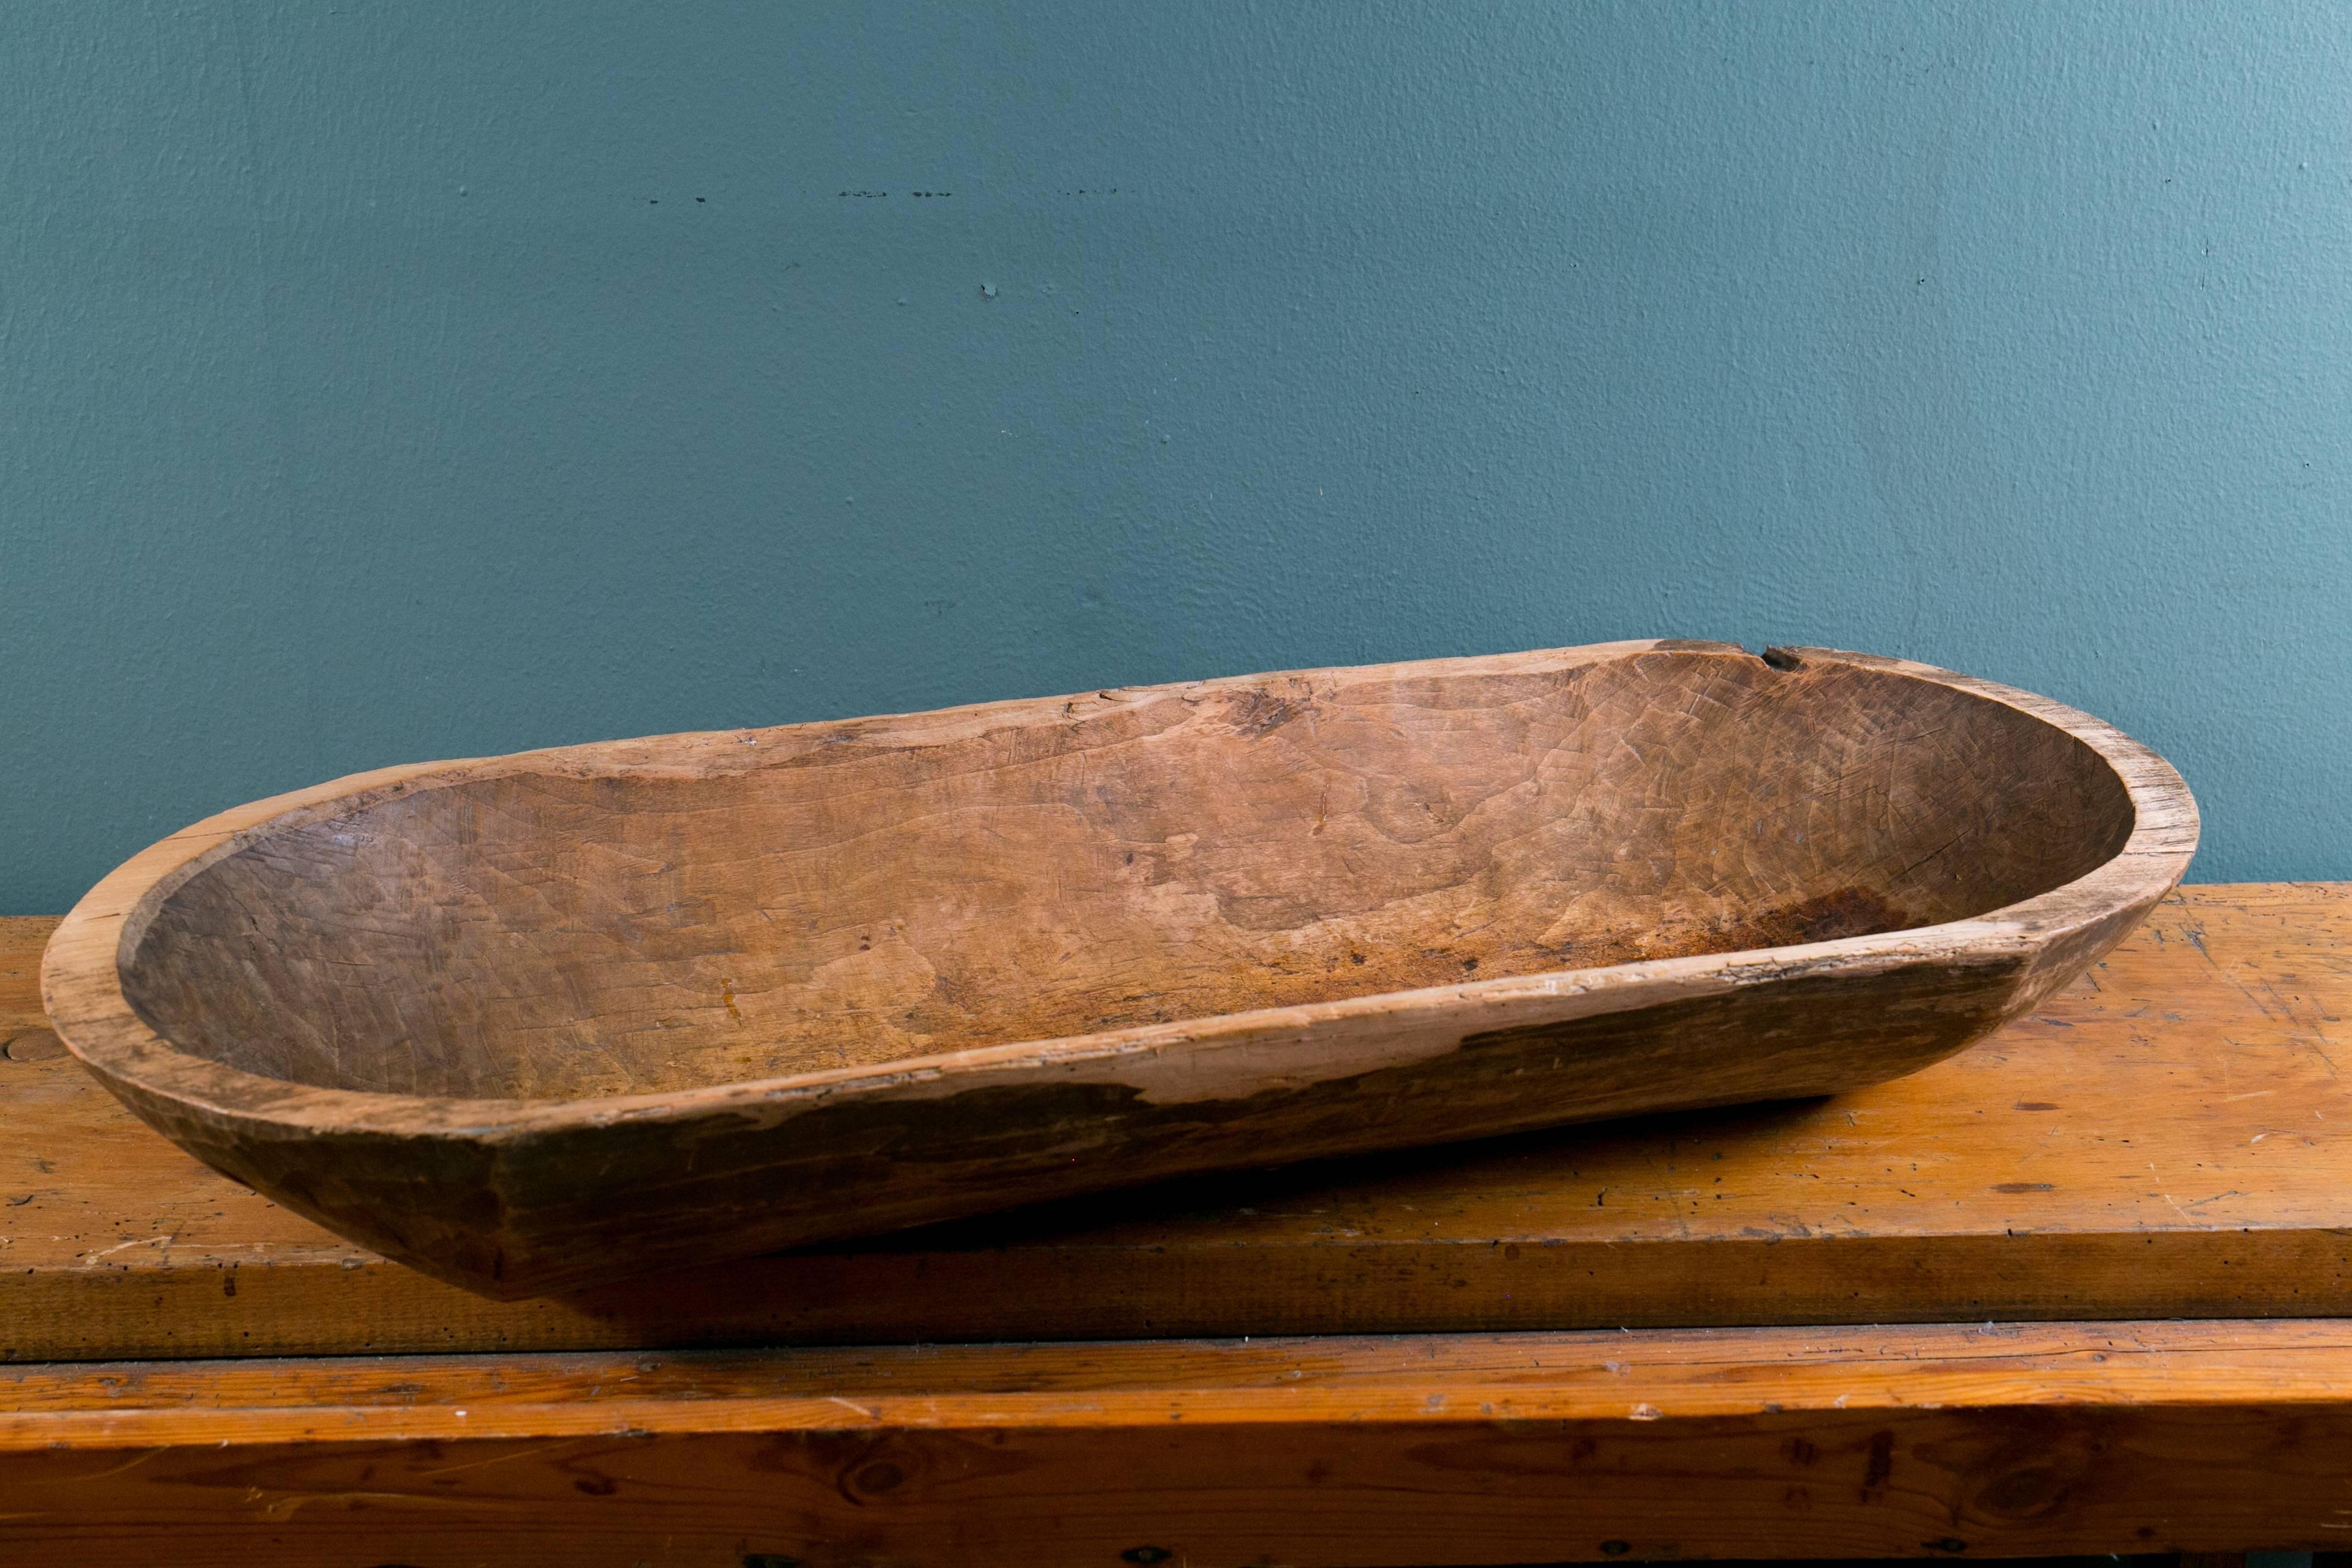 Early 20th century antique Primitive wooden trough, handcrafted in the USA. Oval shape with a flat base and curved, smooth interior. Great as a tabletop decoration.